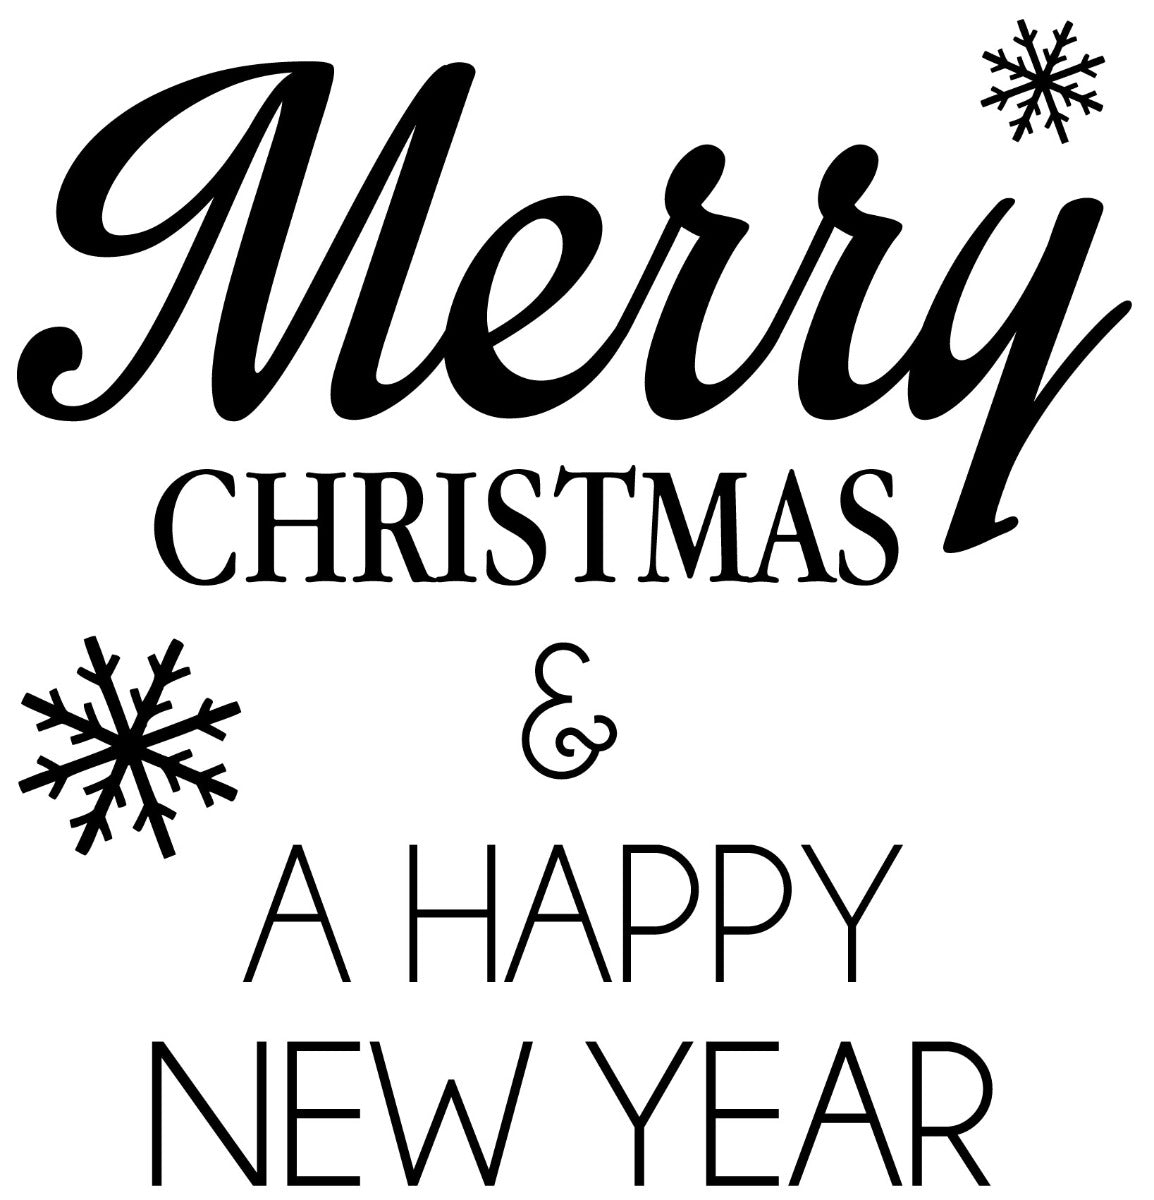 Merry Christmas & Happy New Year Wall Sticker